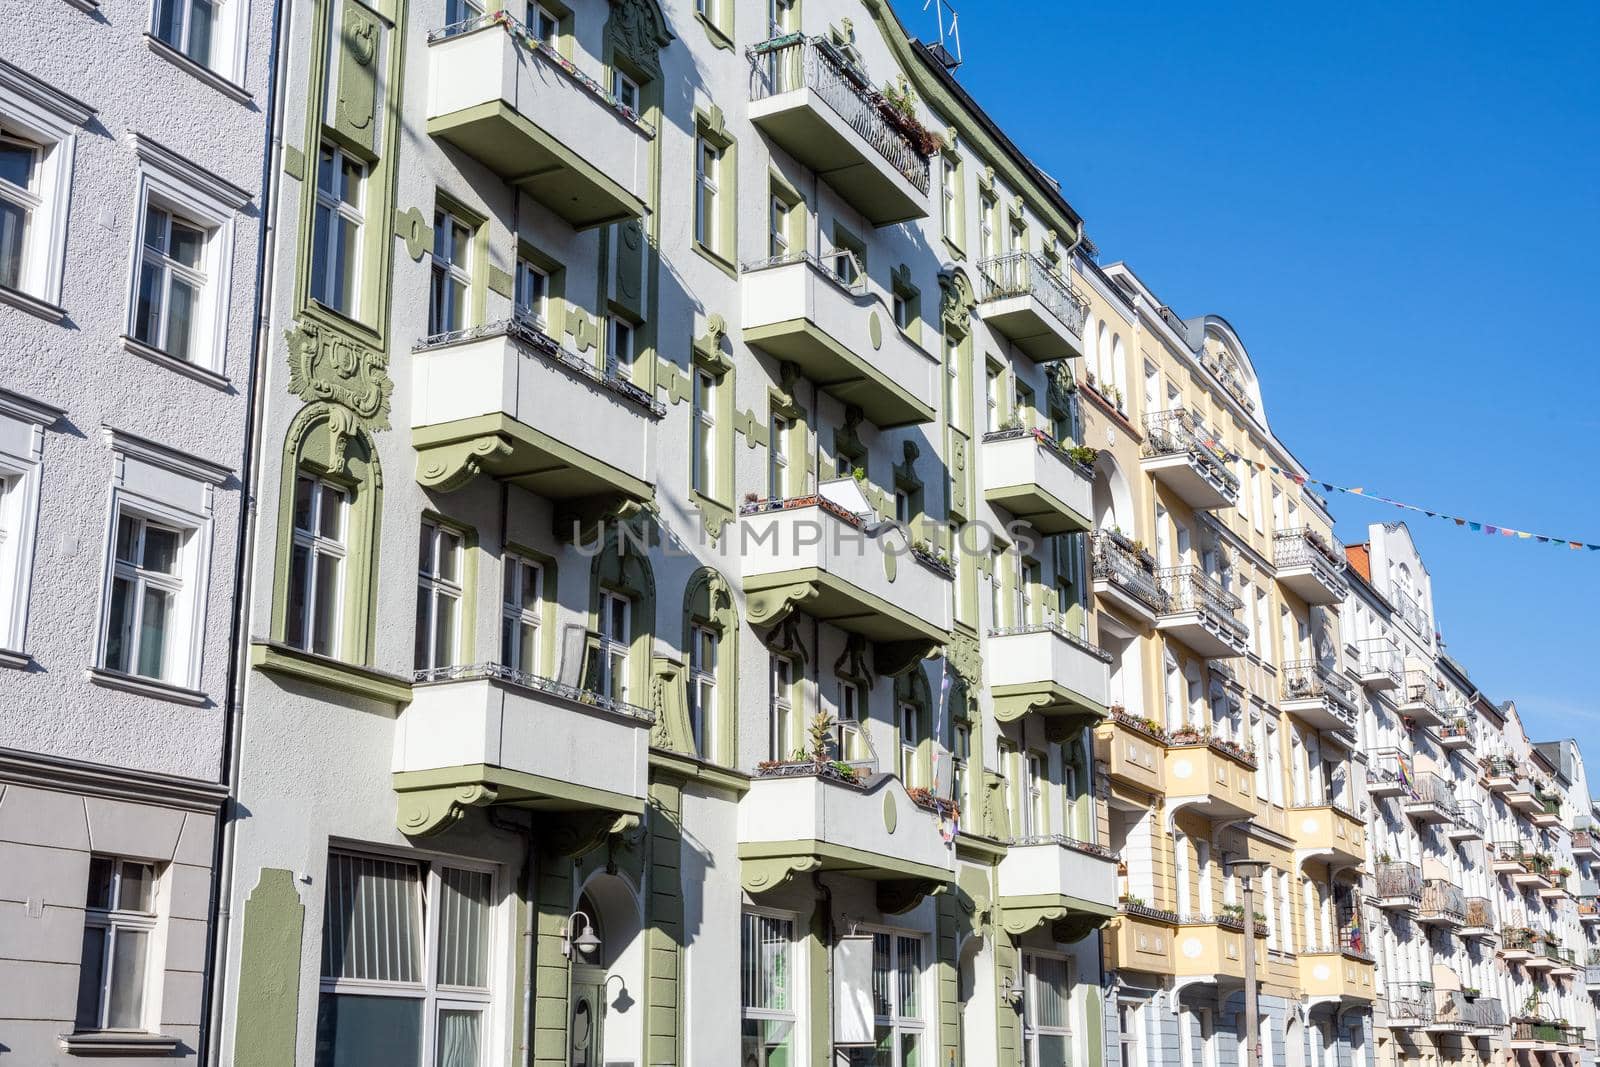 Nice renovated old apartment buildings by elxeneize